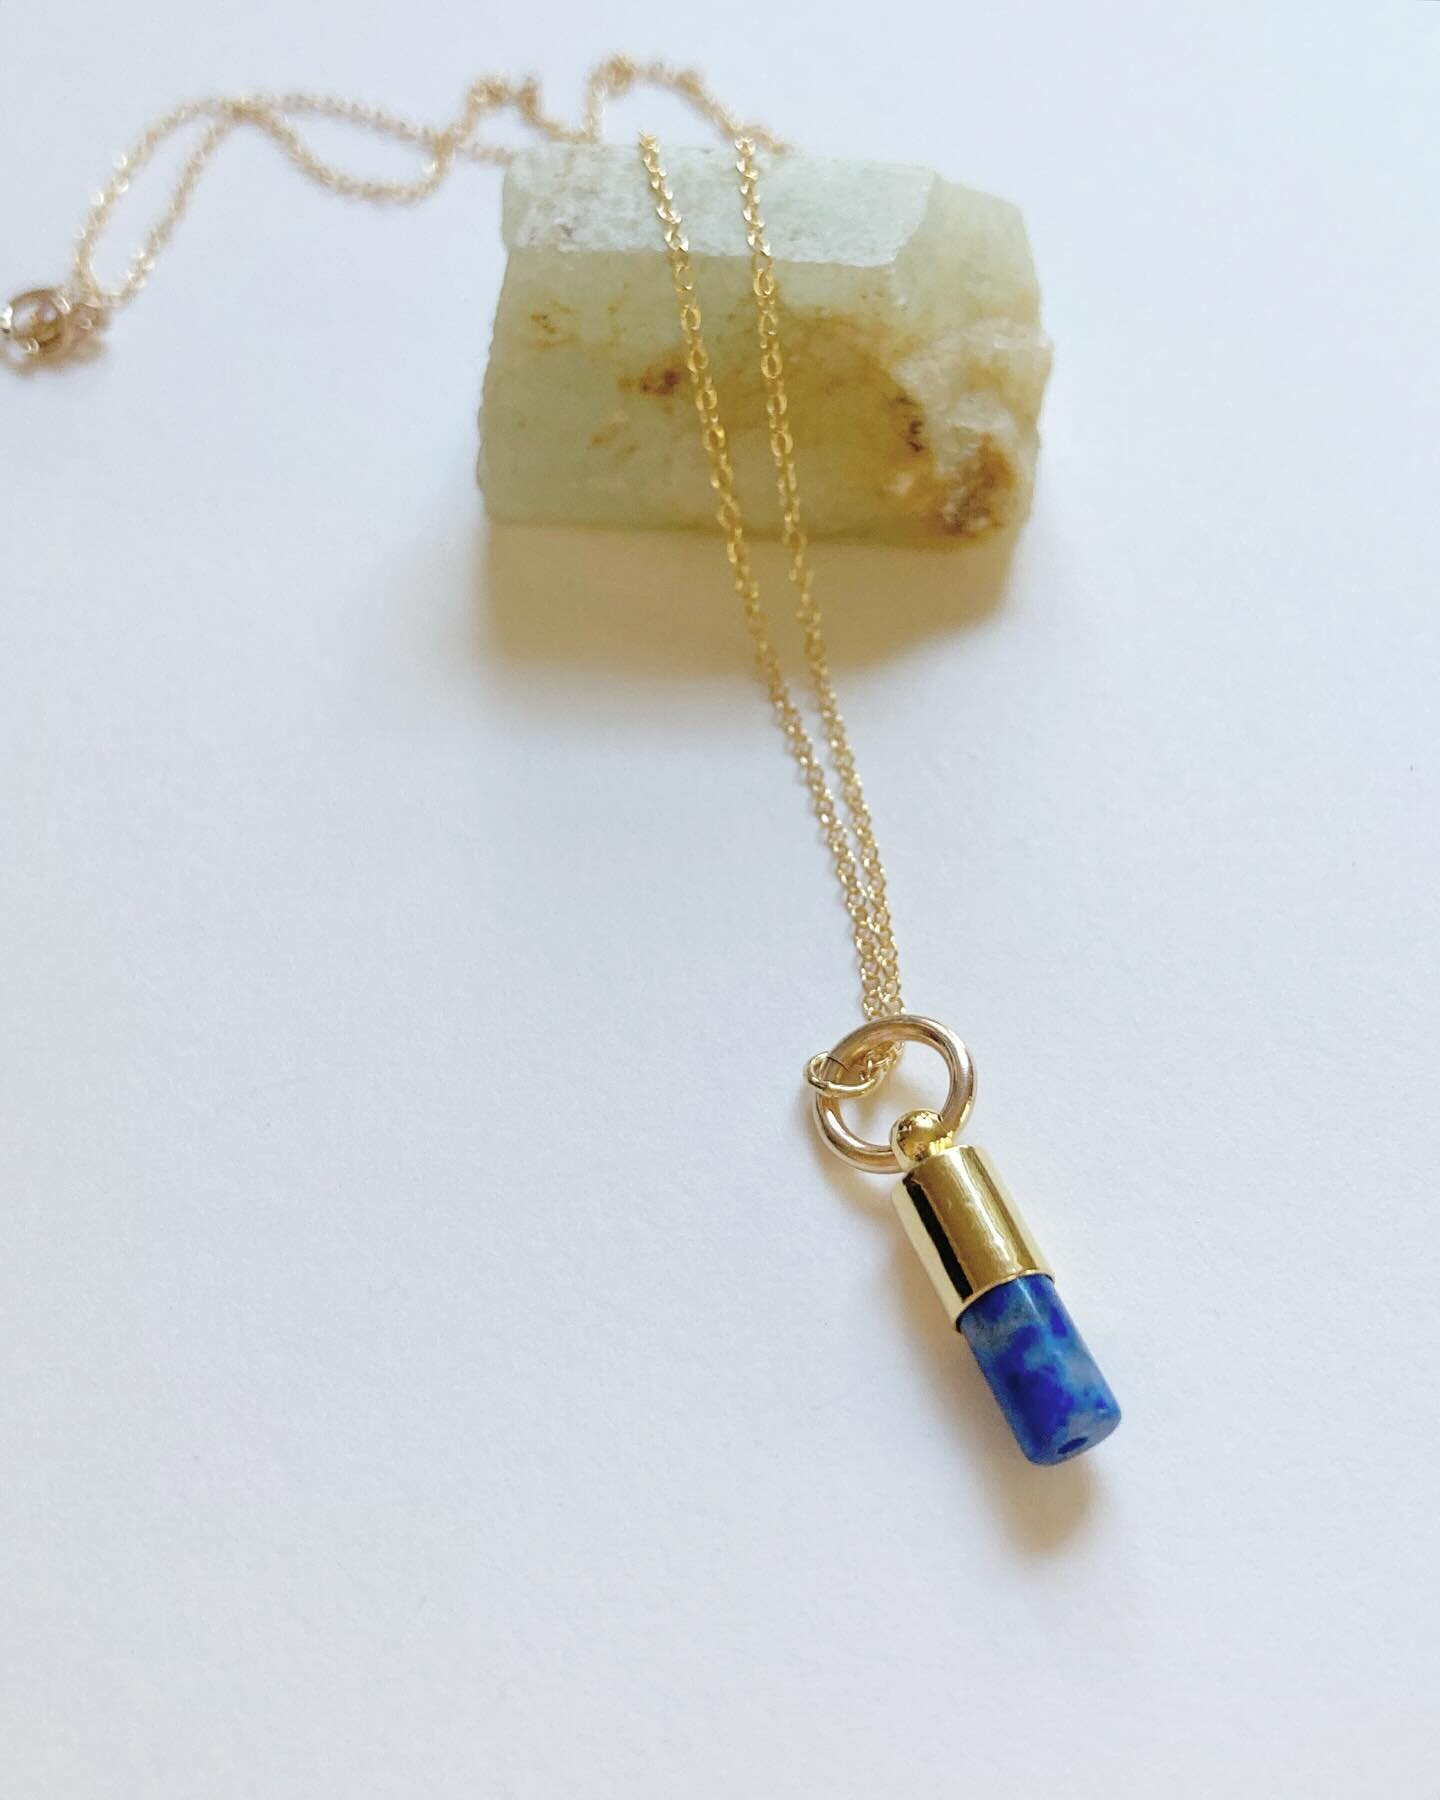 I&rsquo;m so grateful to be sending out designs this week, including the new Moment necklace pictured here, to shops across the country. Check out my work in-person at these lovely places! 
@kempermuseum @wishgiftco @fitzbennetthome @o_suzannah @_lef